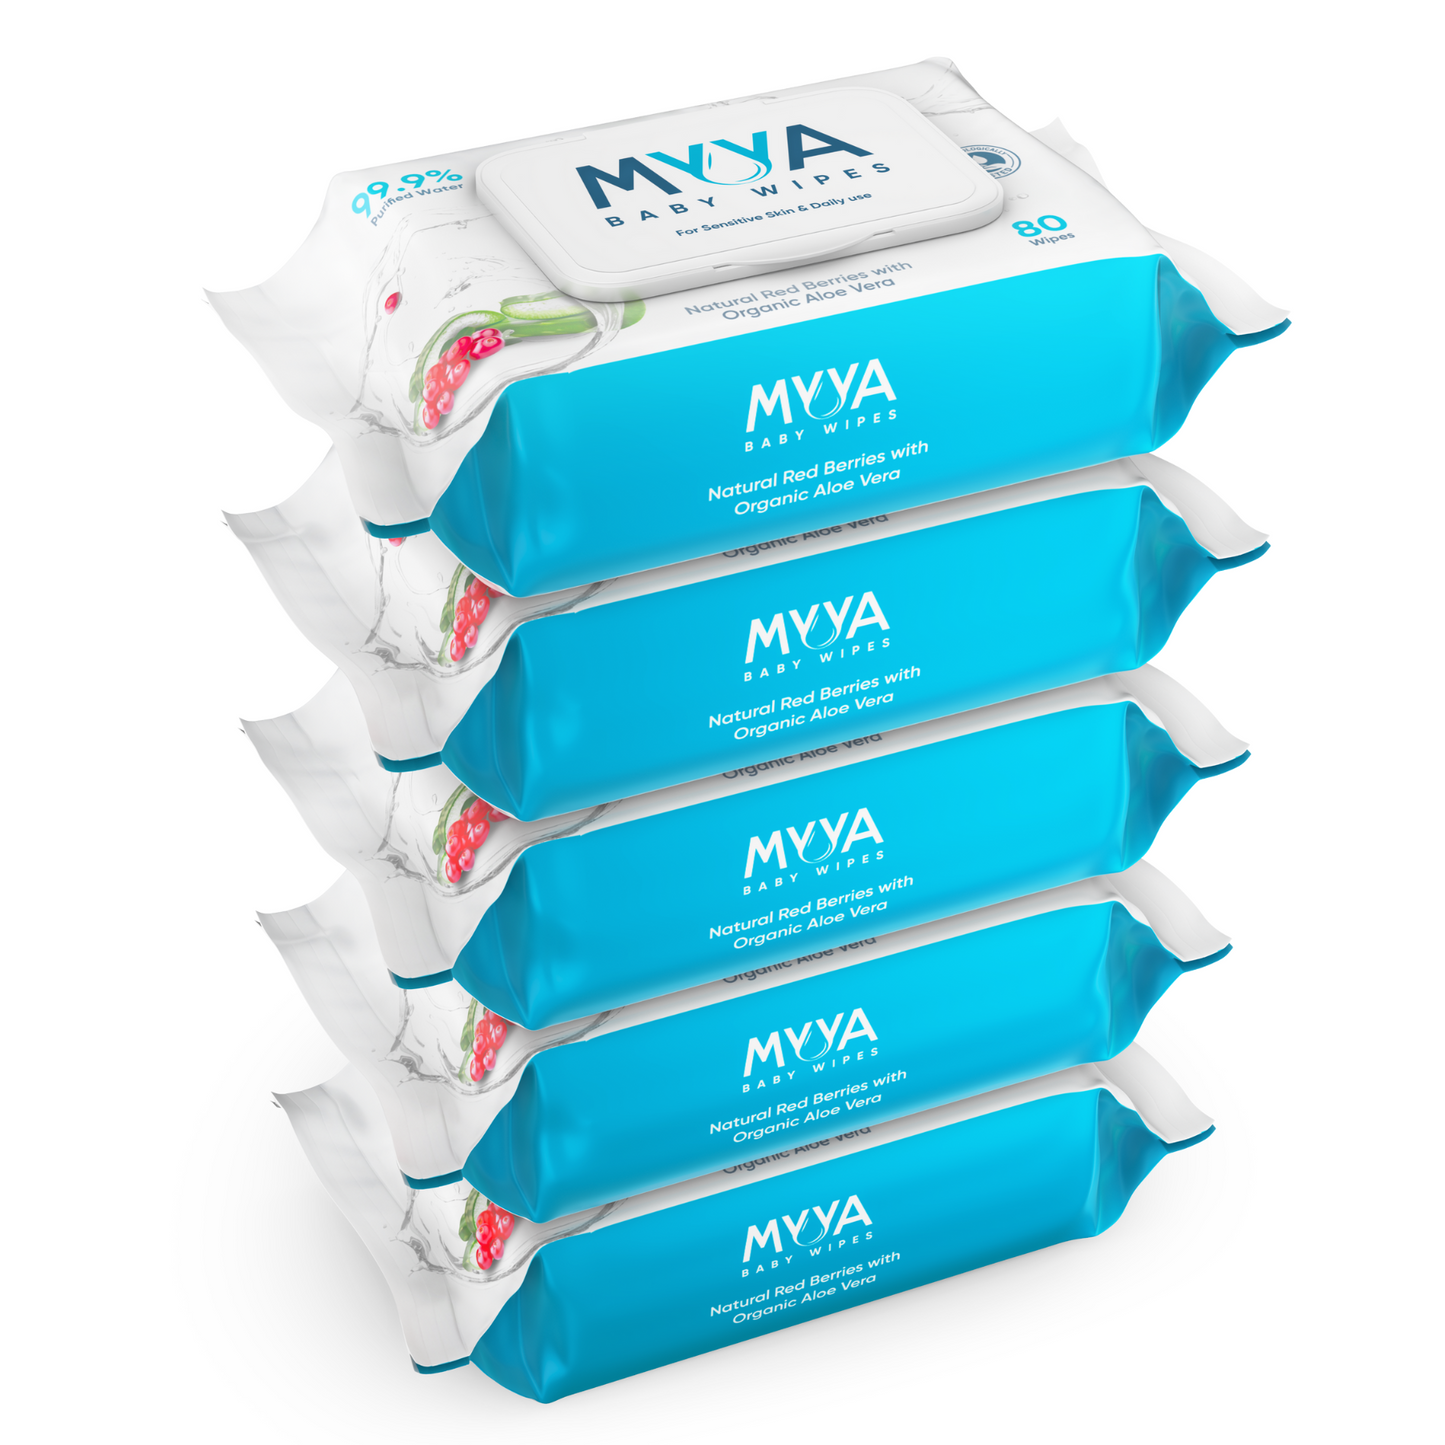 Myya Baby Wipes 5 Pack. Myya means water in the oriental countries. 99.9% purified with a hint of druit extracts